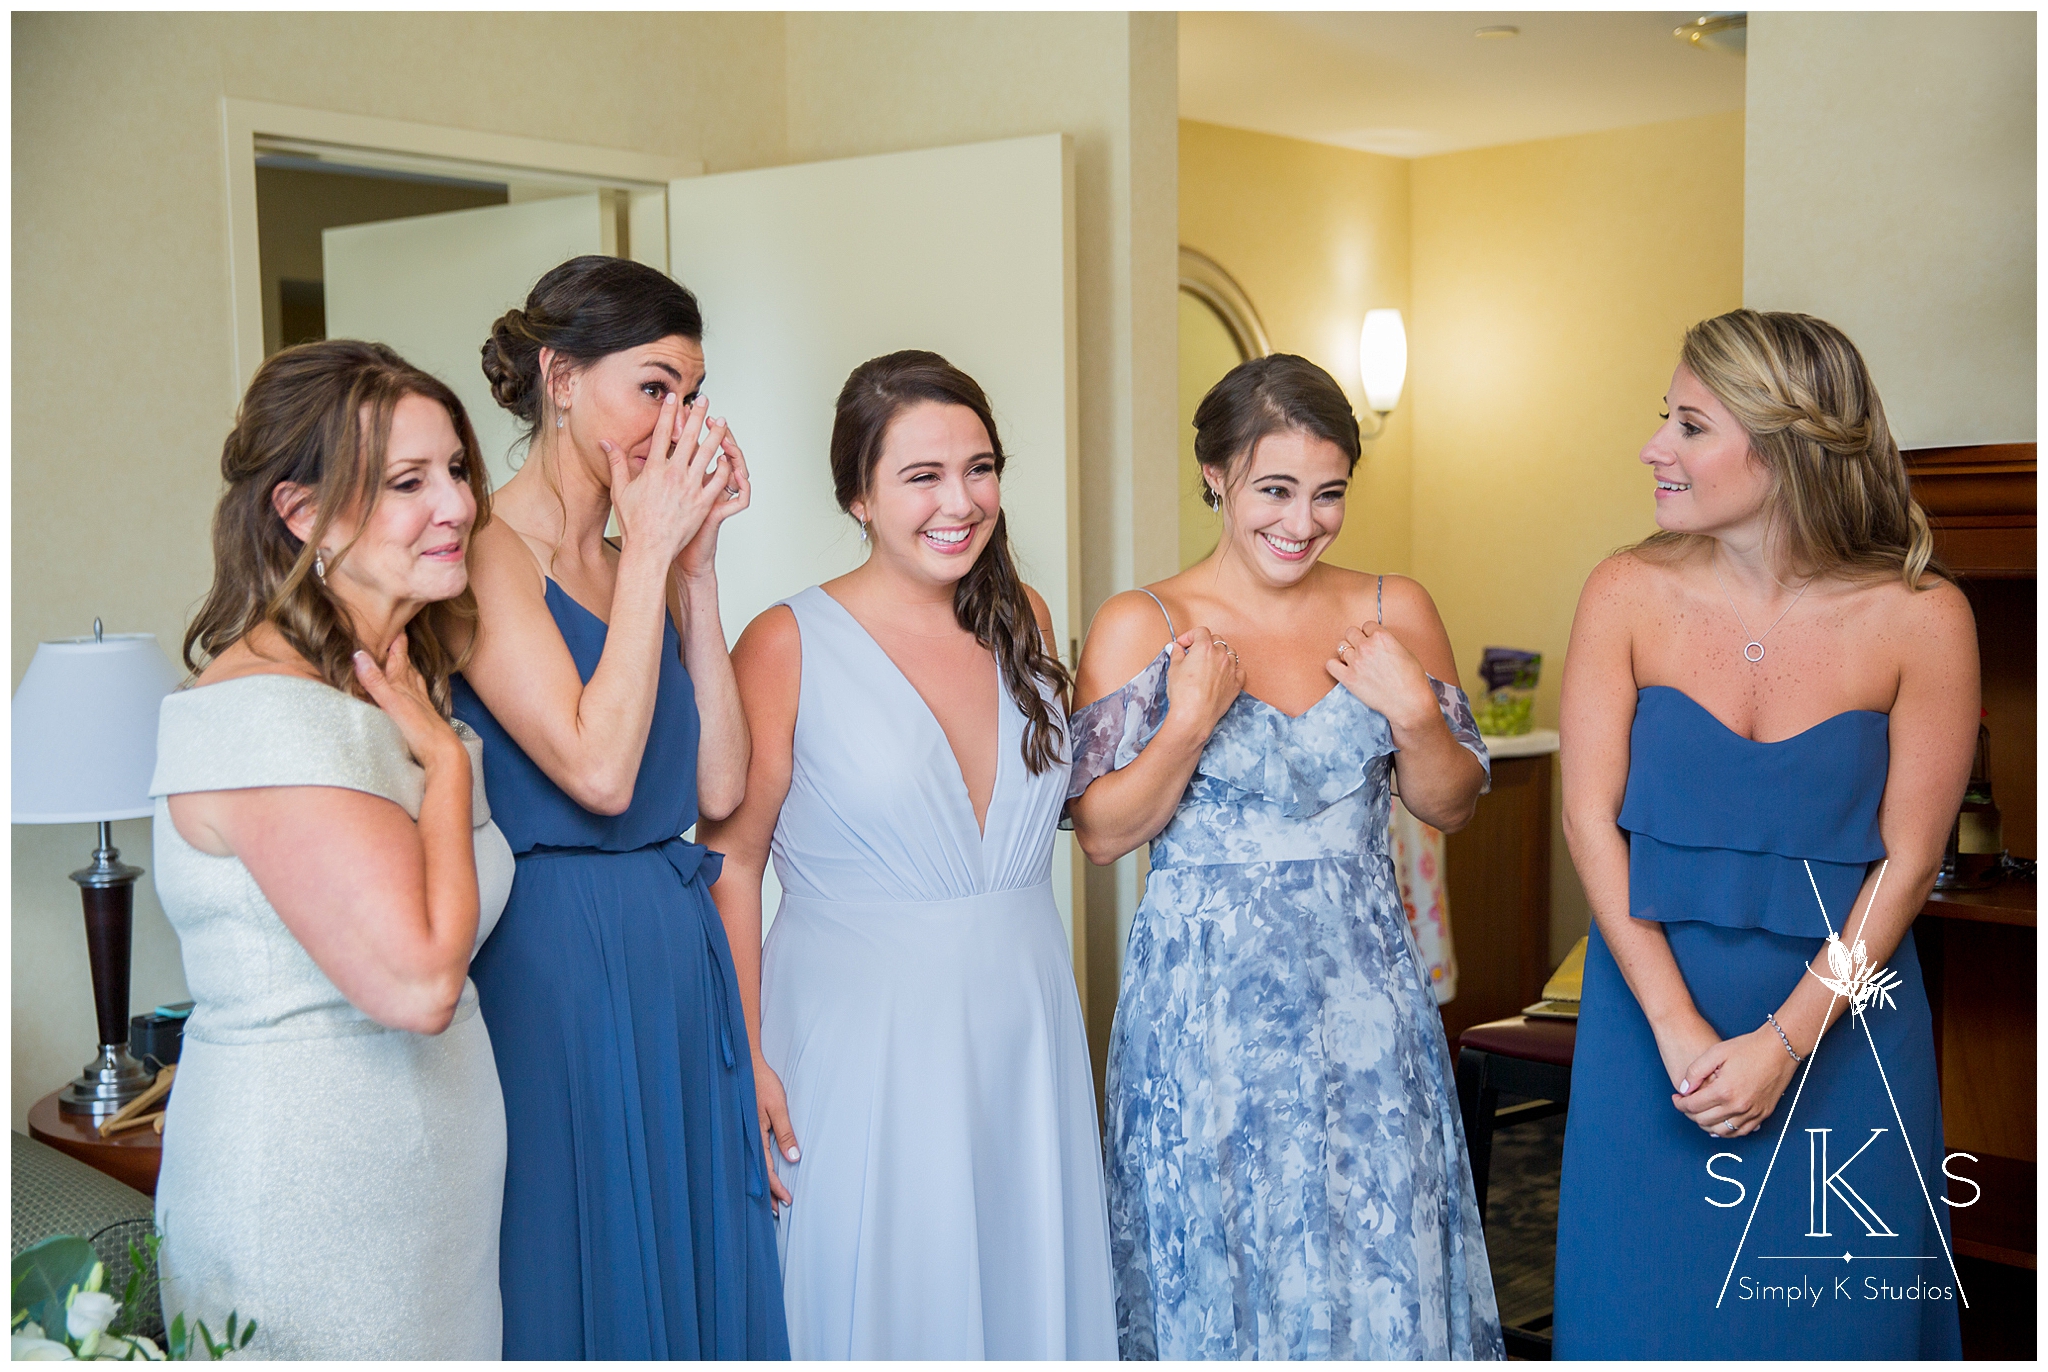  Bridesmaids with emotion at seeing the bride 